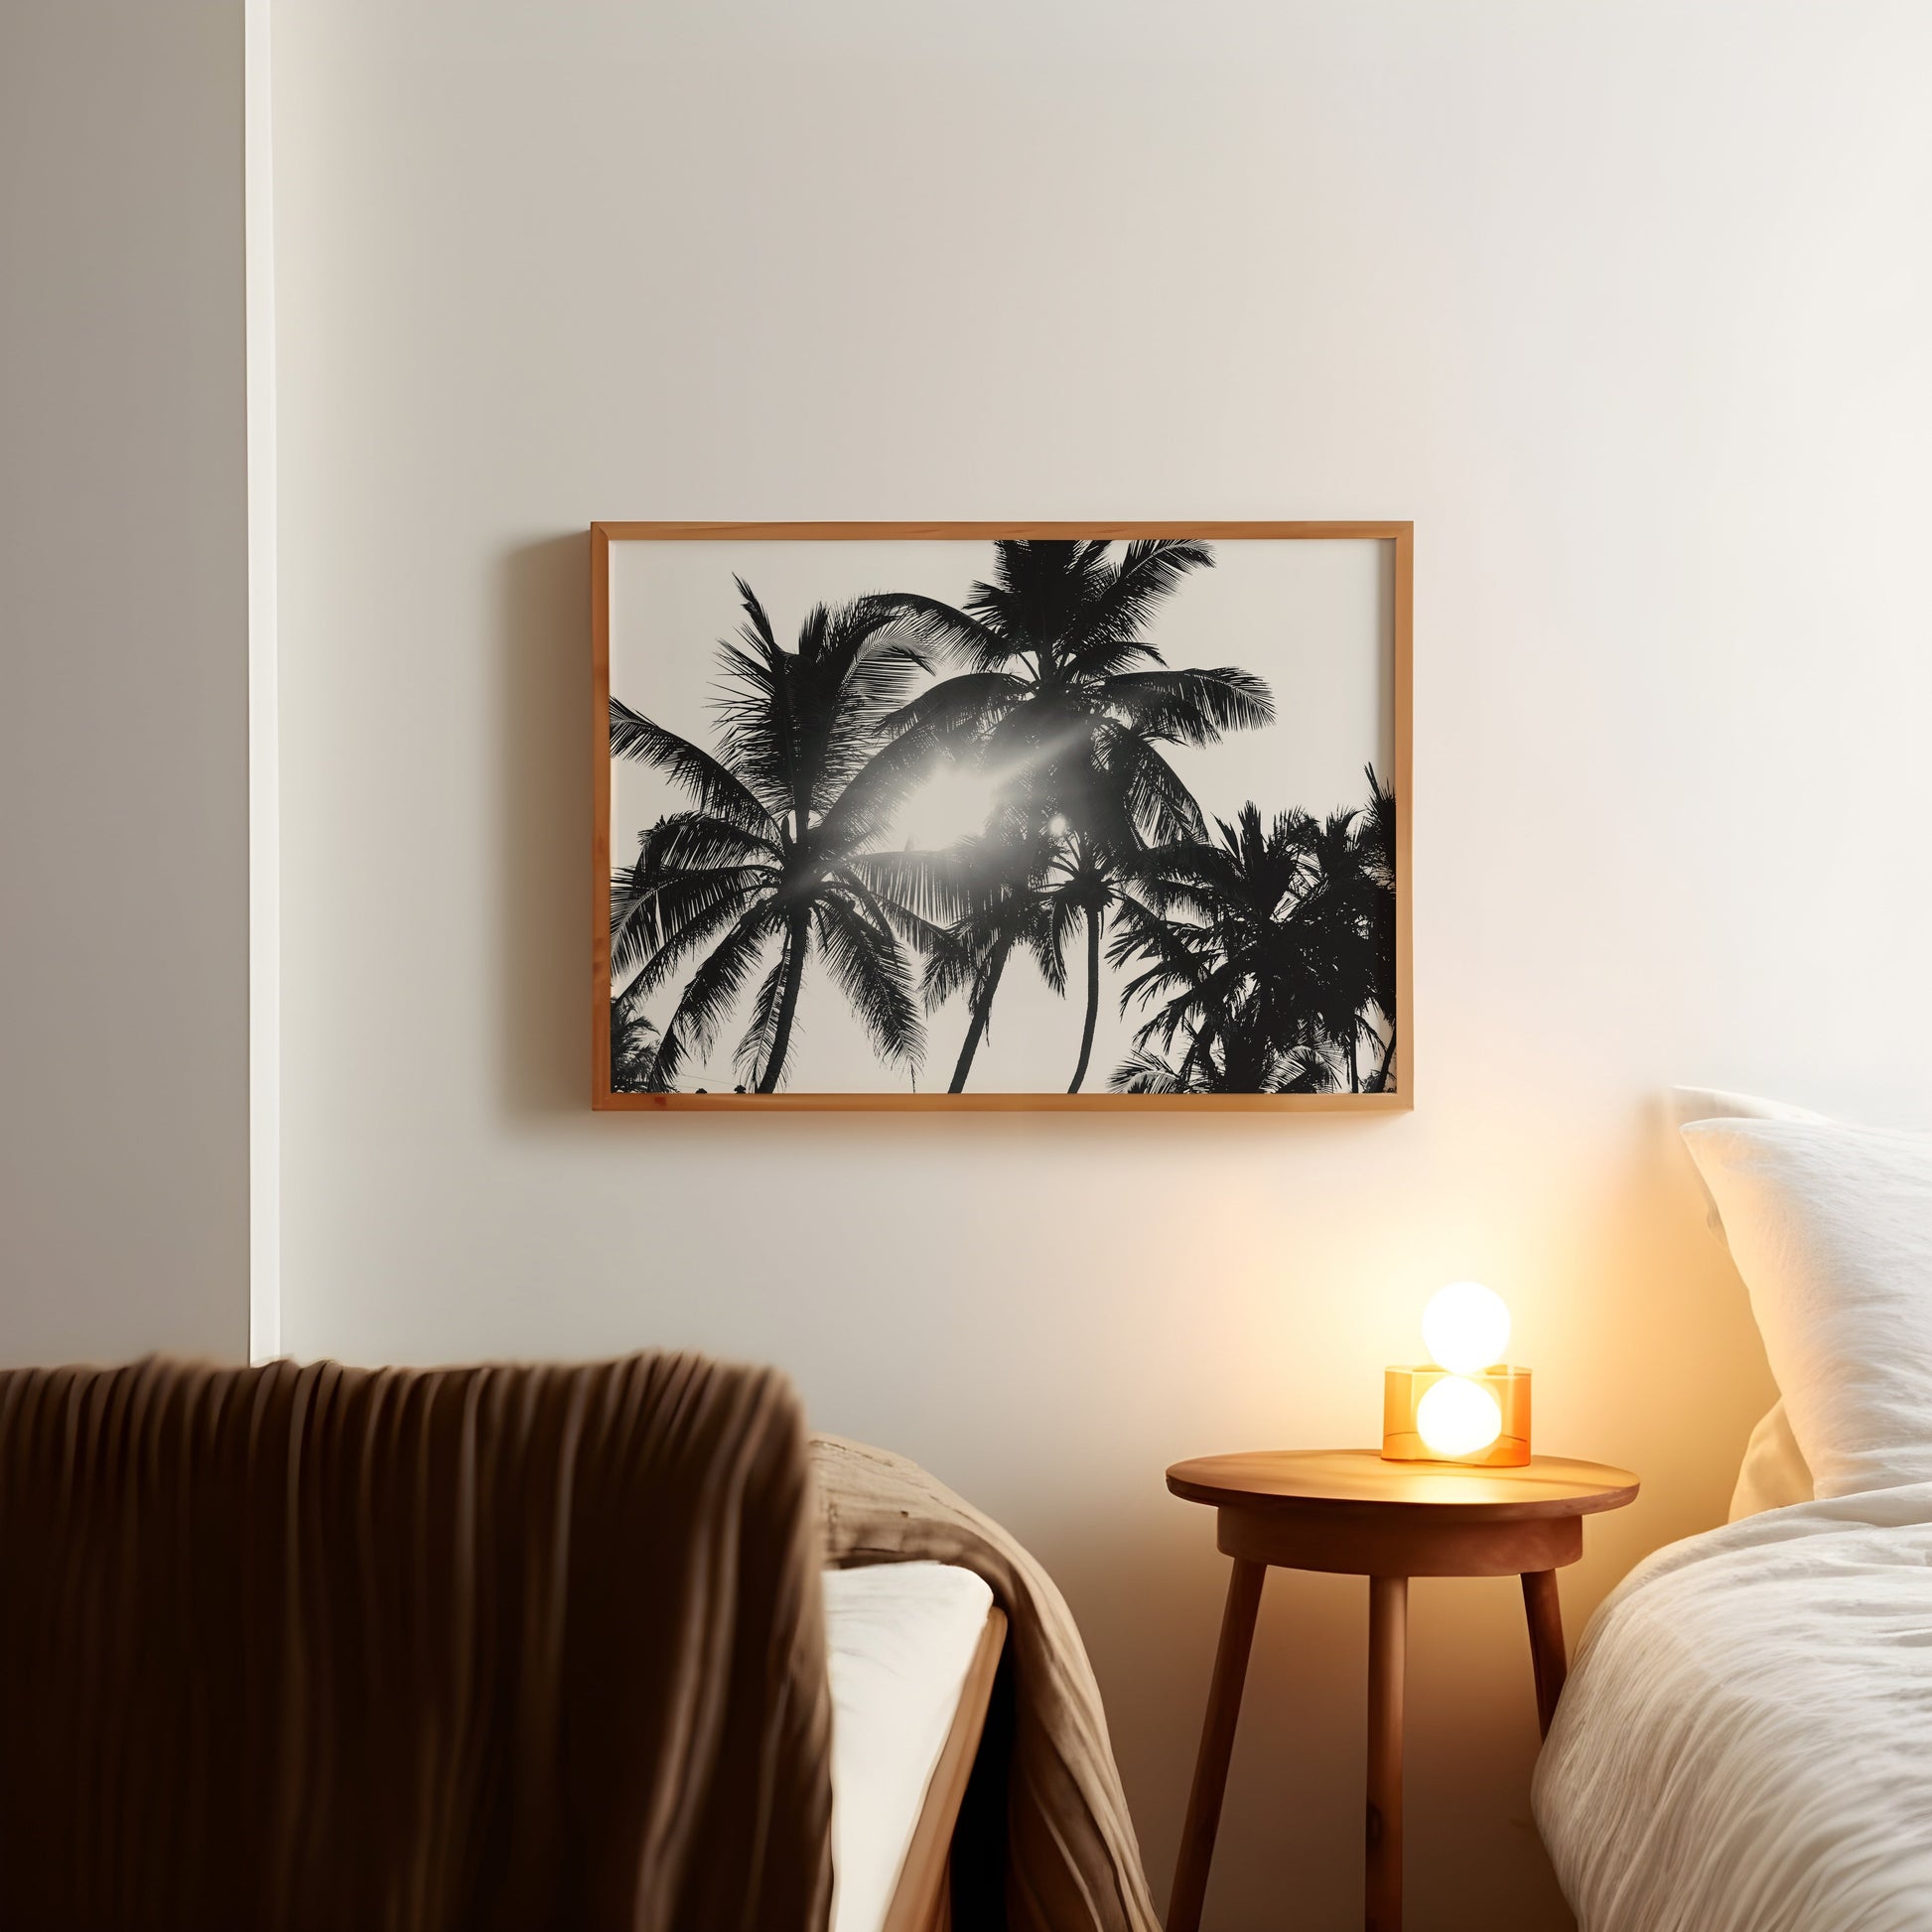 a picture of a palm tree hangs above a bed